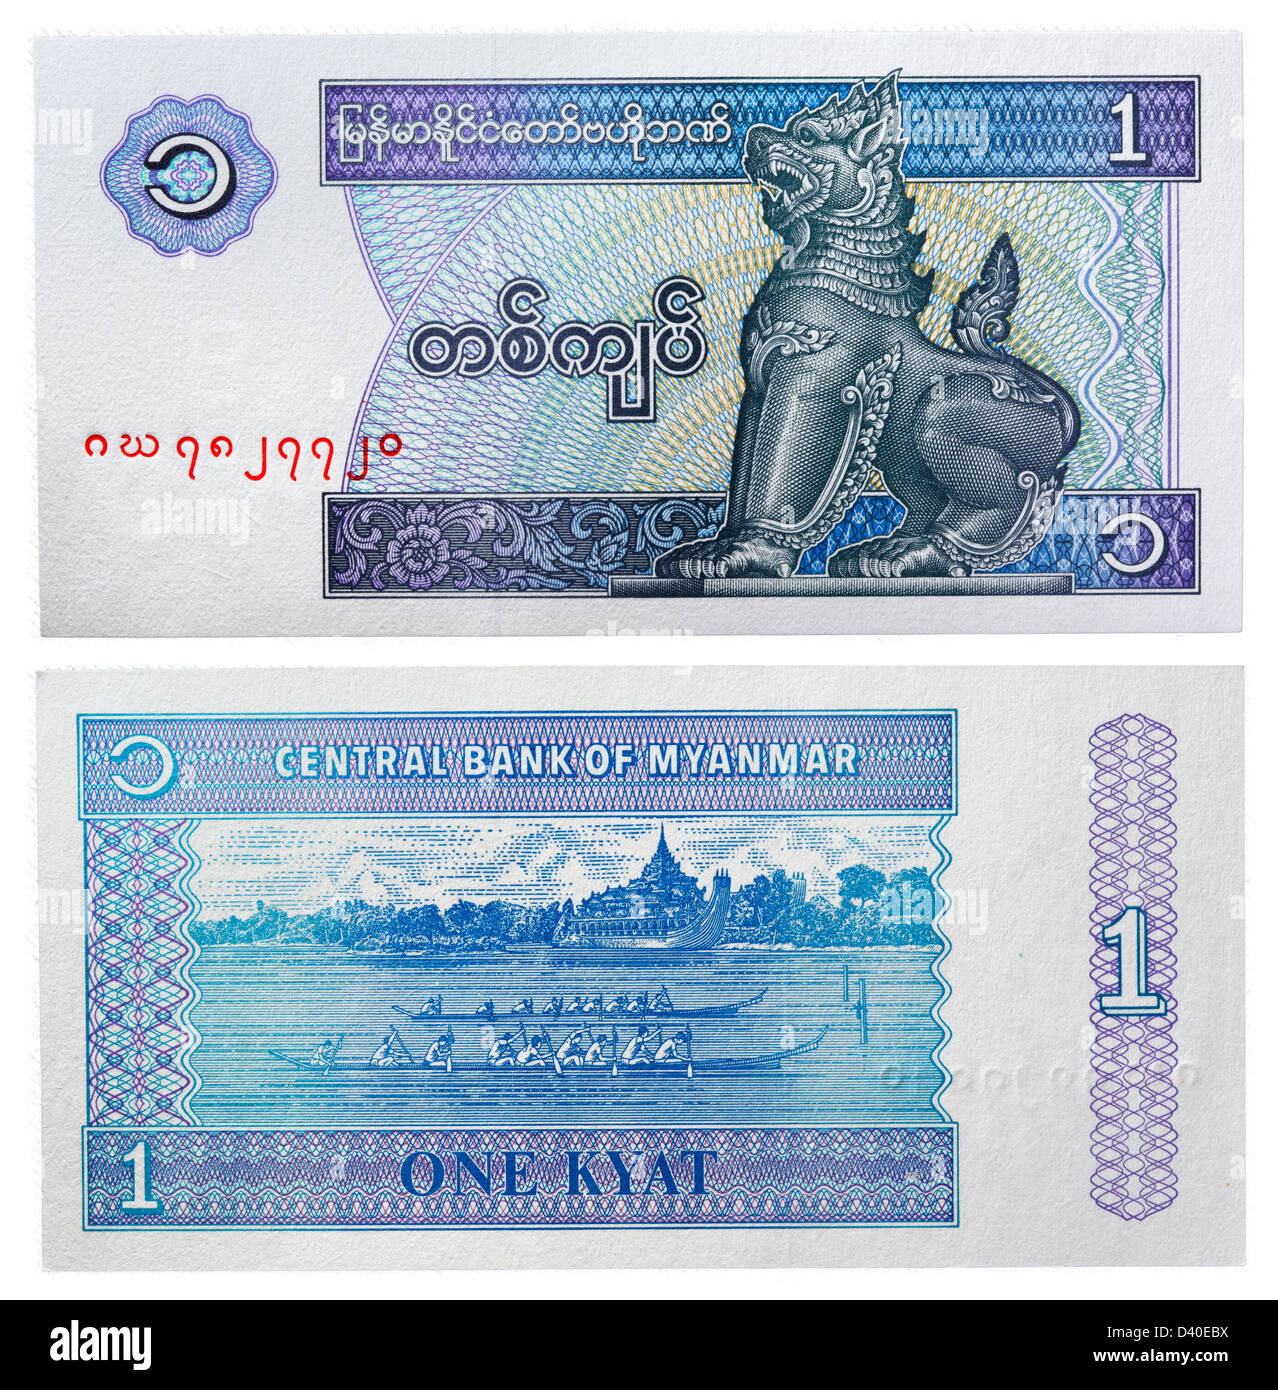 1 Kyat banknote, Mythical animal Chinze and canoes, Myanmar, 1996 Stock Photo